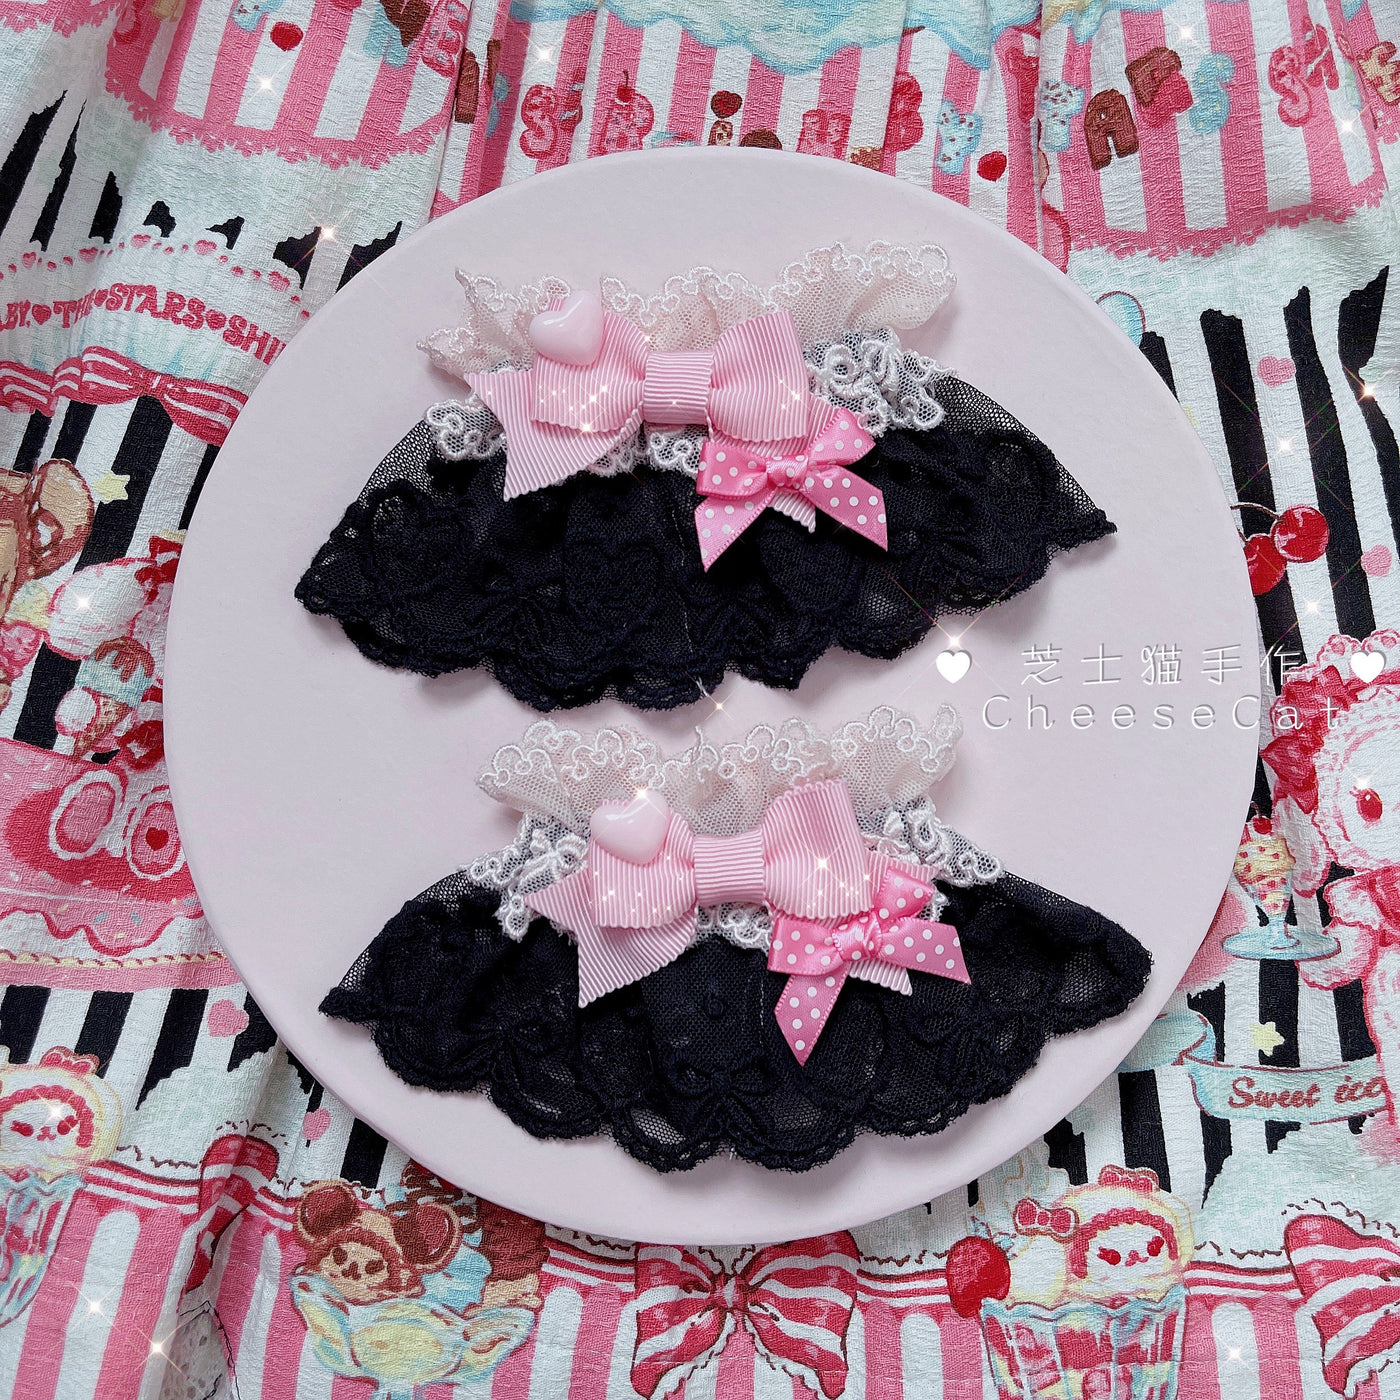 (Buyforme)Cheese Cat~Sweet and Happy Flower Limited Lolita Cuff black-pink cuffs (1 pair)  